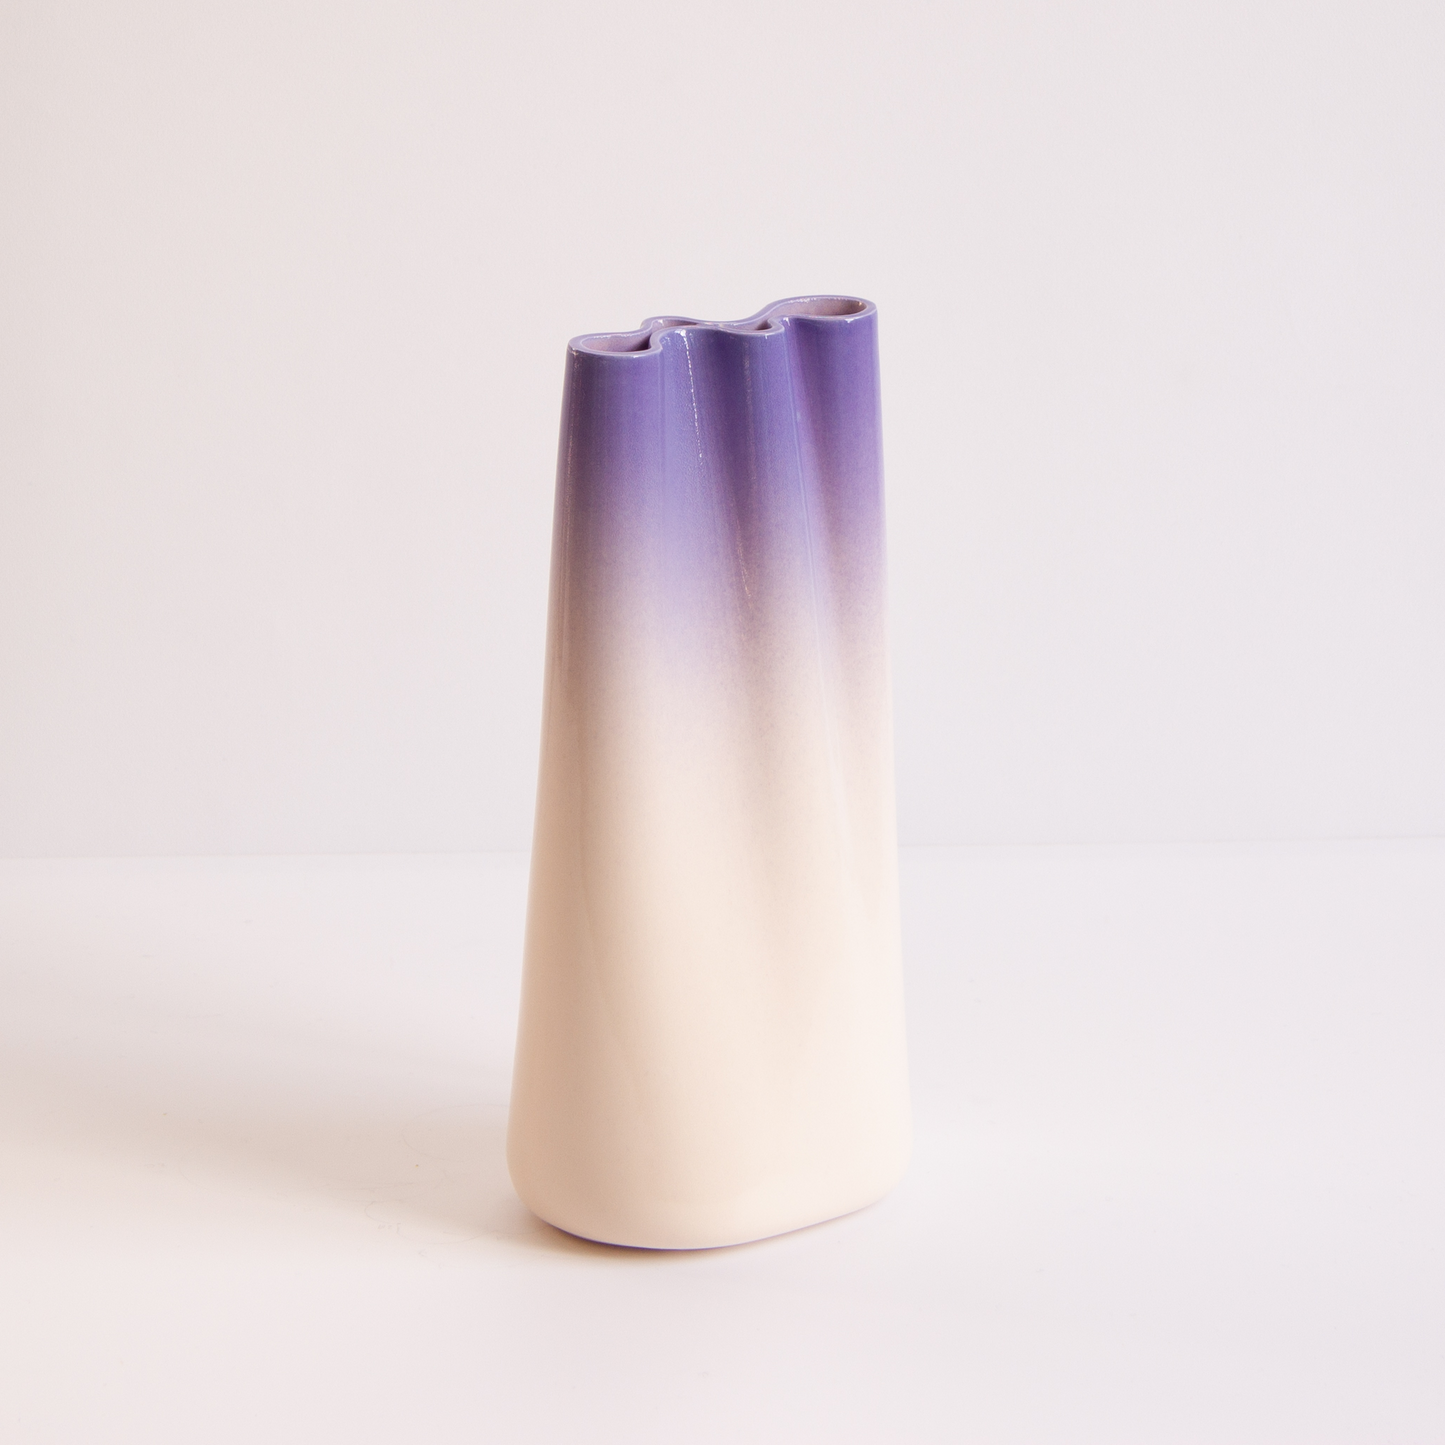 [JUMONY] High Gloss Porcelain Vase - Tall in English Laverder